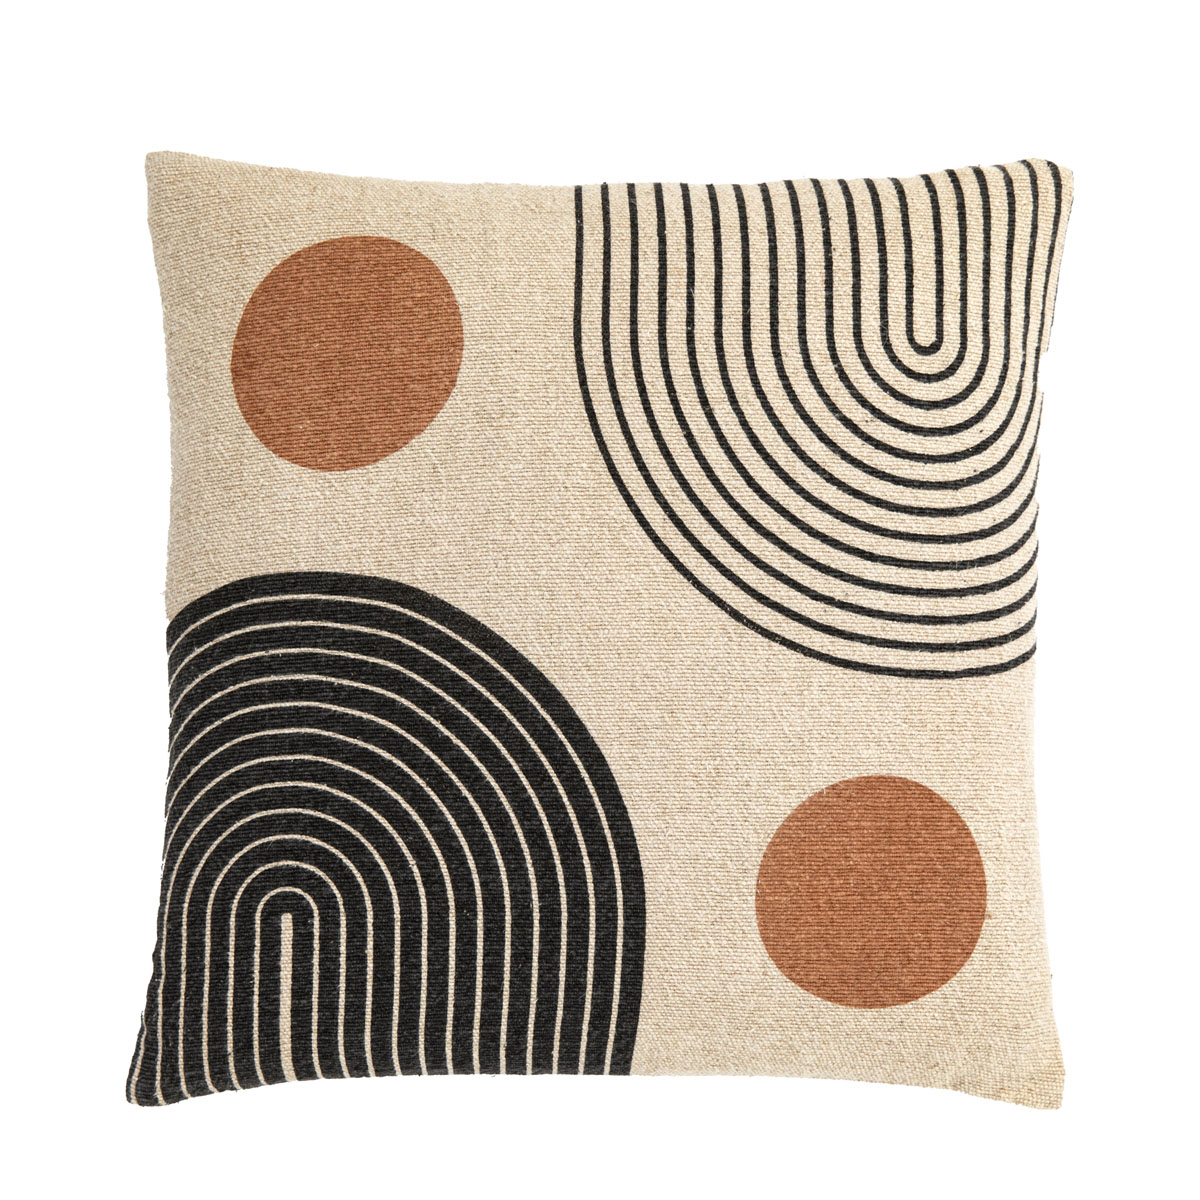 Negril Cushion Cover 450x450mm